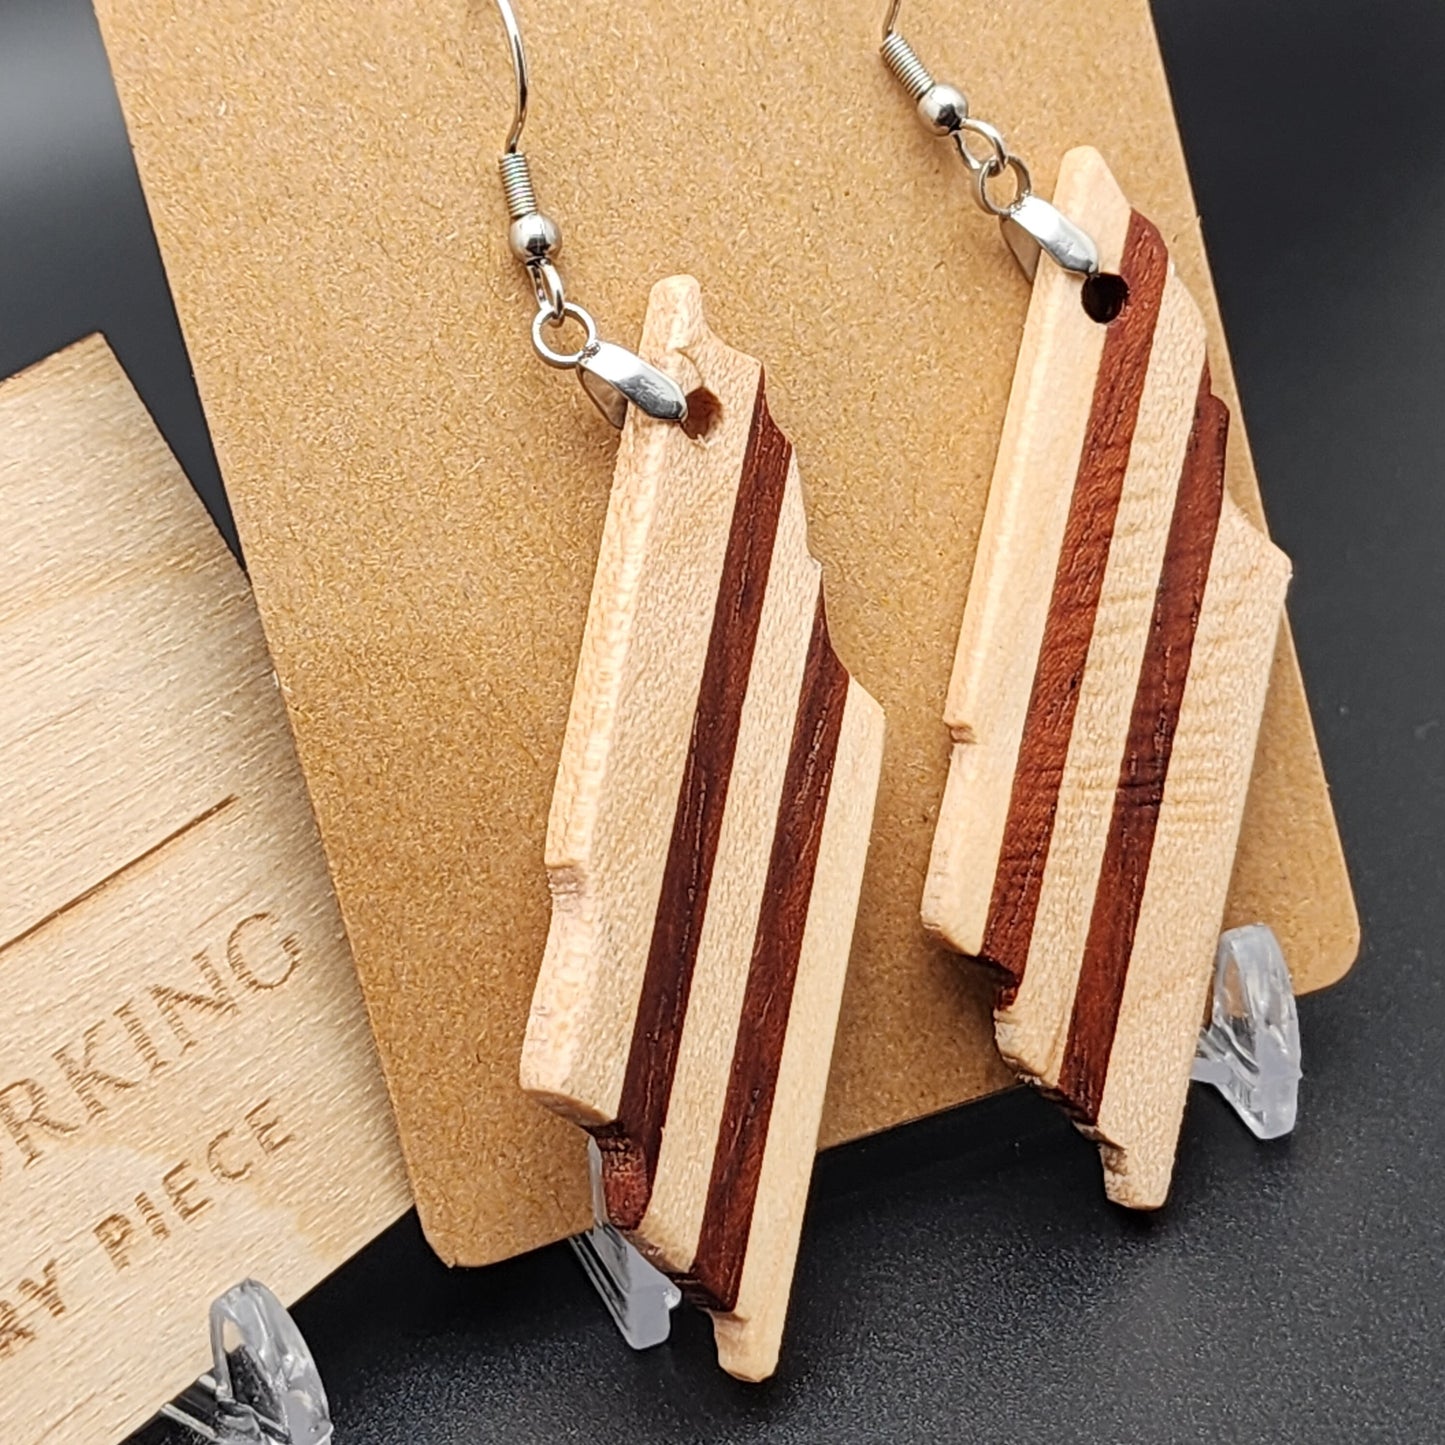 State of Tennessee - Exotic Wood Earrings - Jatoba and Maple, Hypo-Allergenic Stainless Steel Hooks